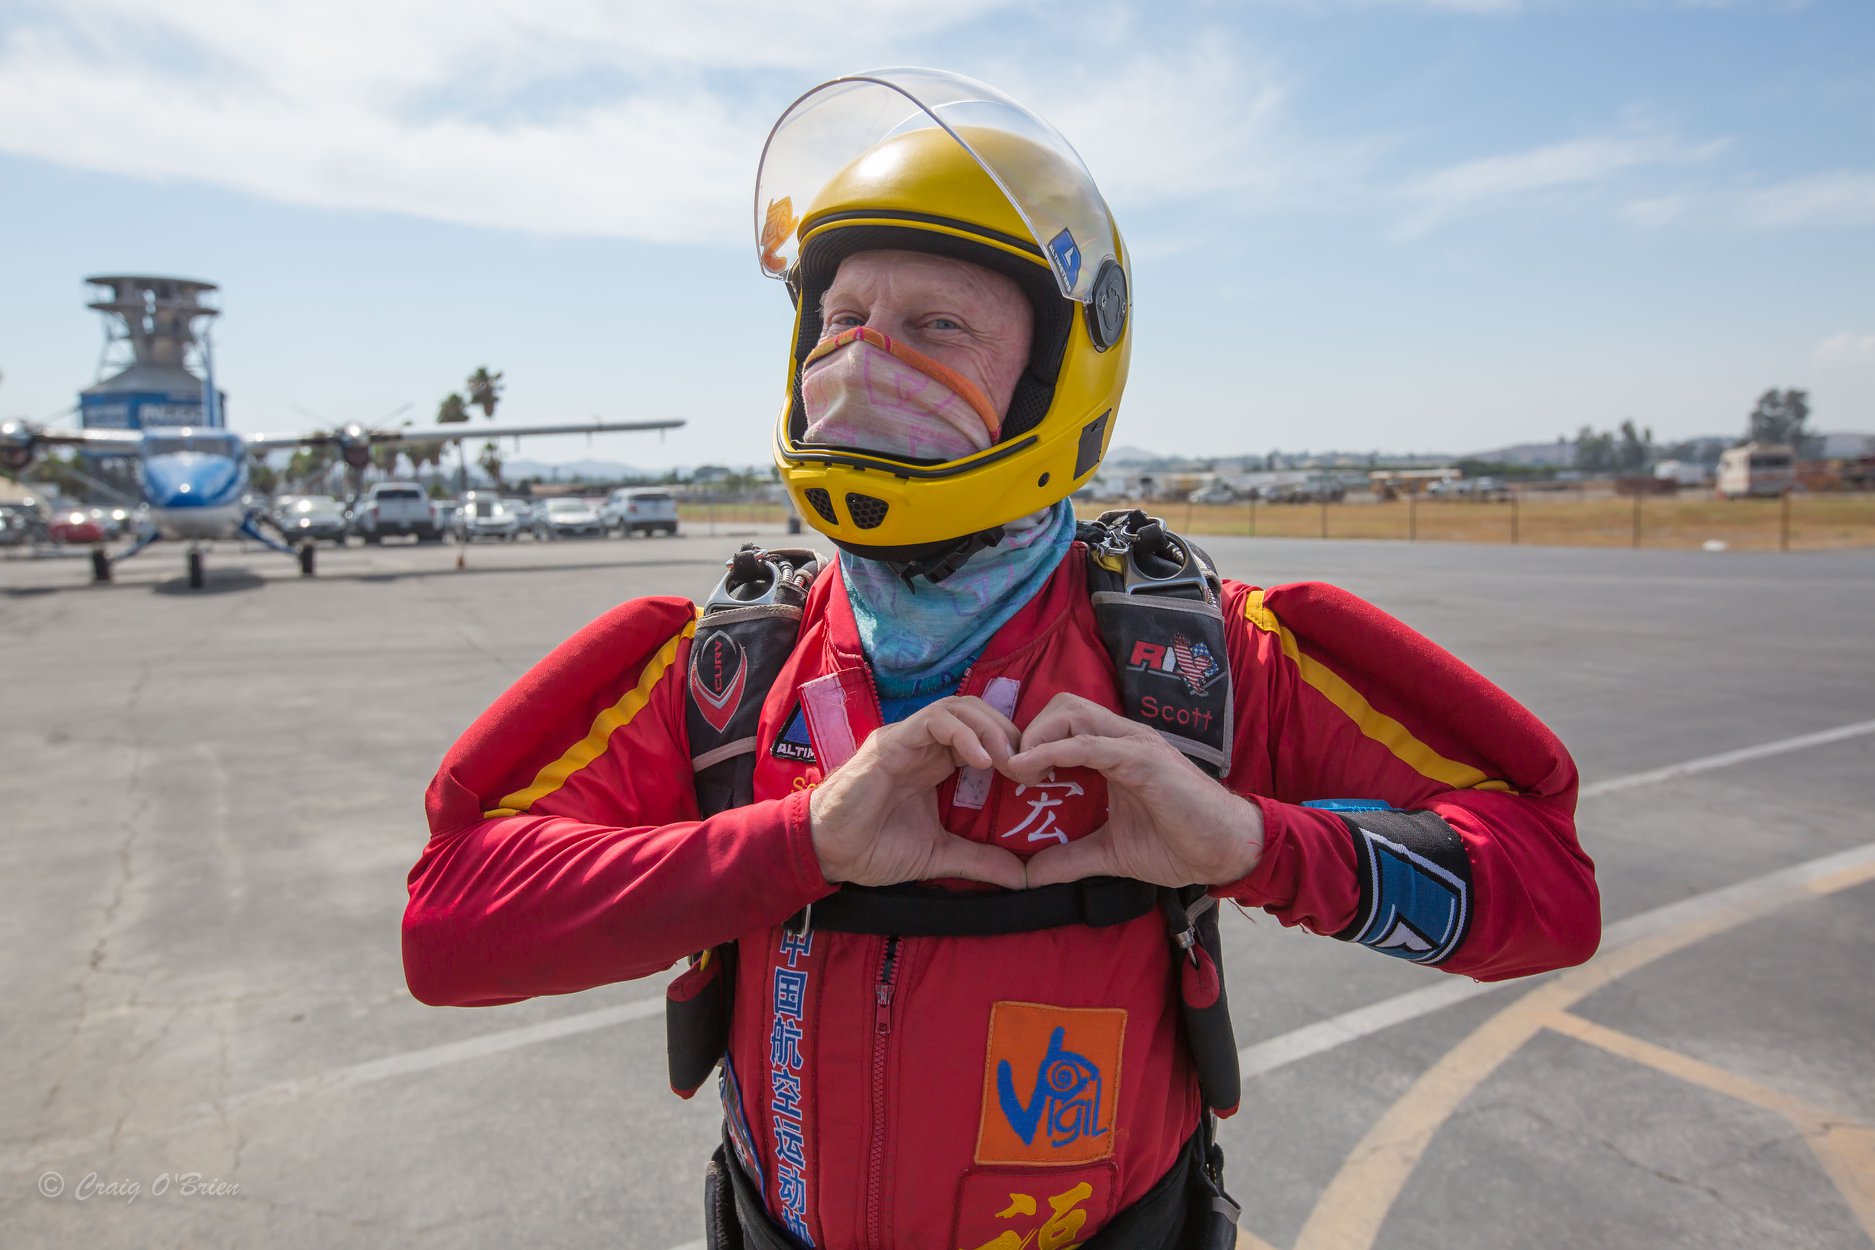 An older jumper makes the heart sign on his chest before boarding